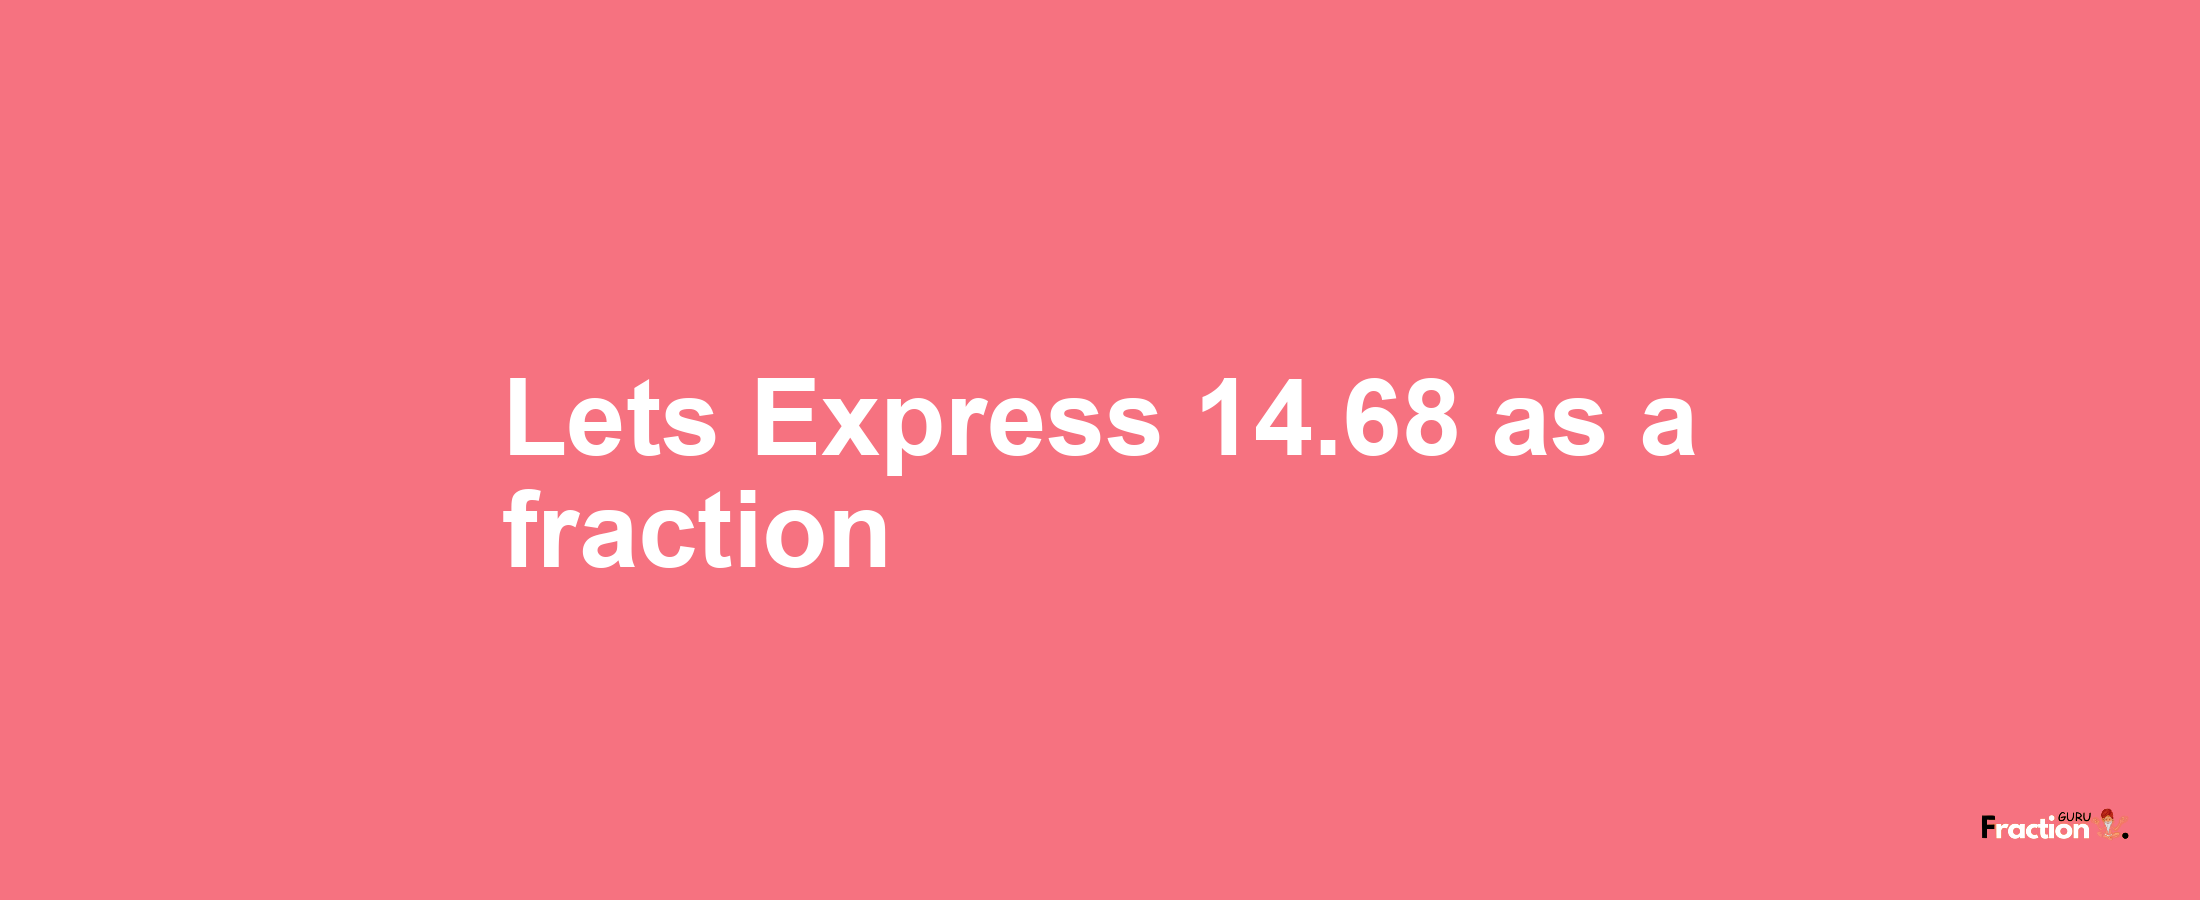 Lets Express 14.68 as afraction